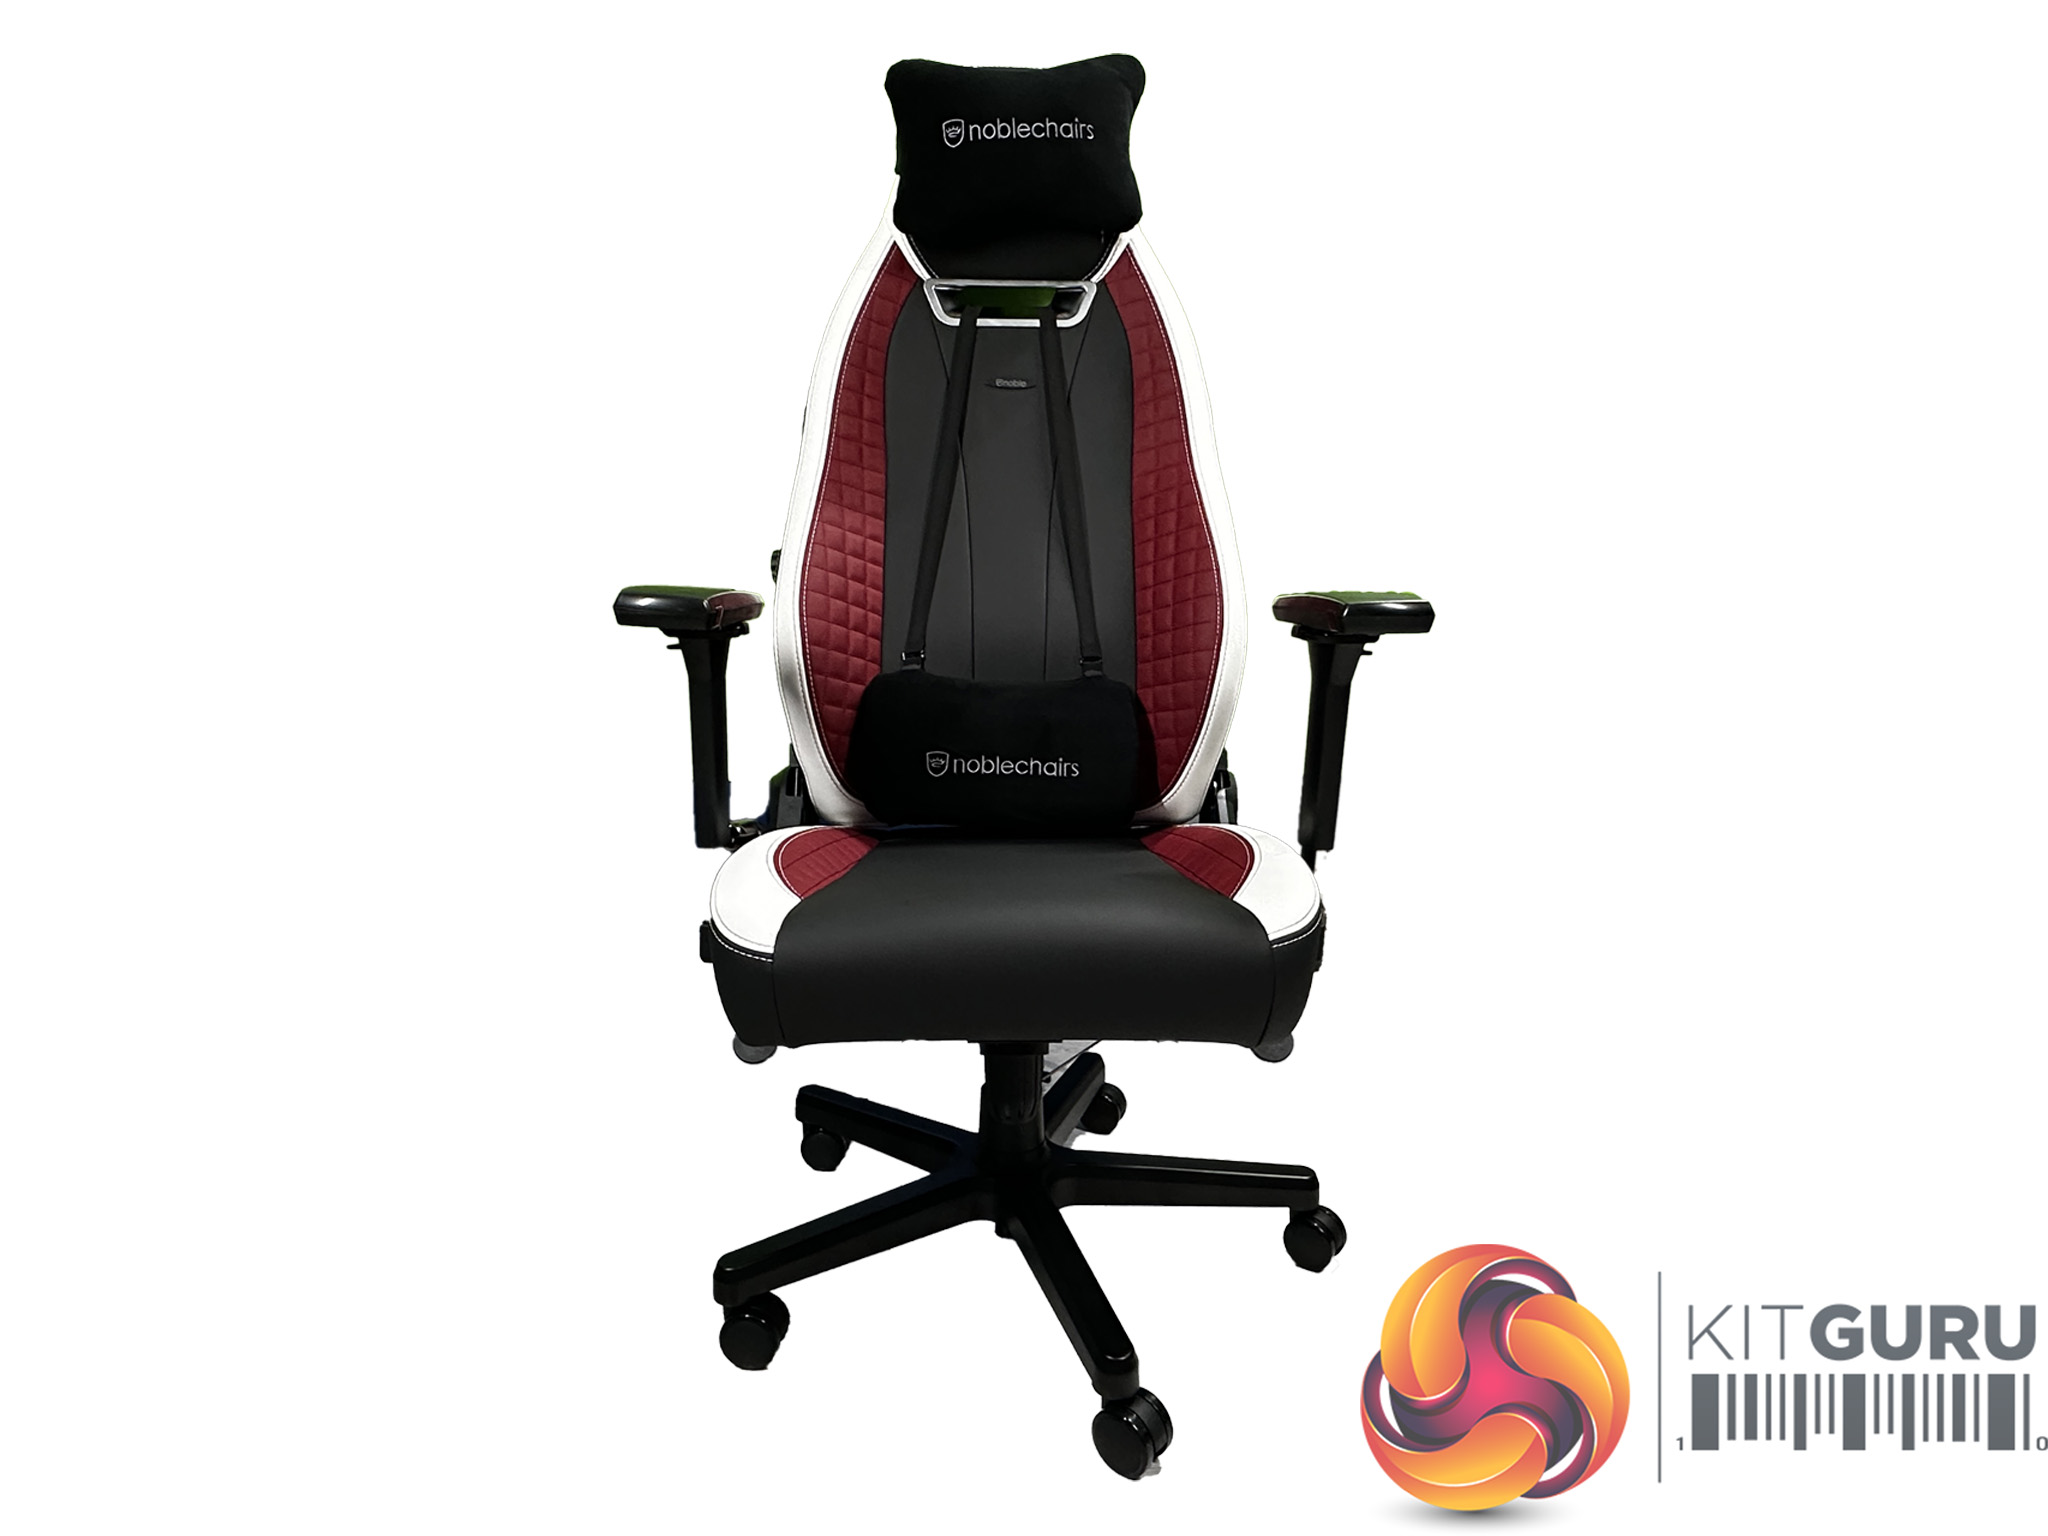 noblechairs announces Legend Series gaming chairs starting at $639 - Niche  Gamer